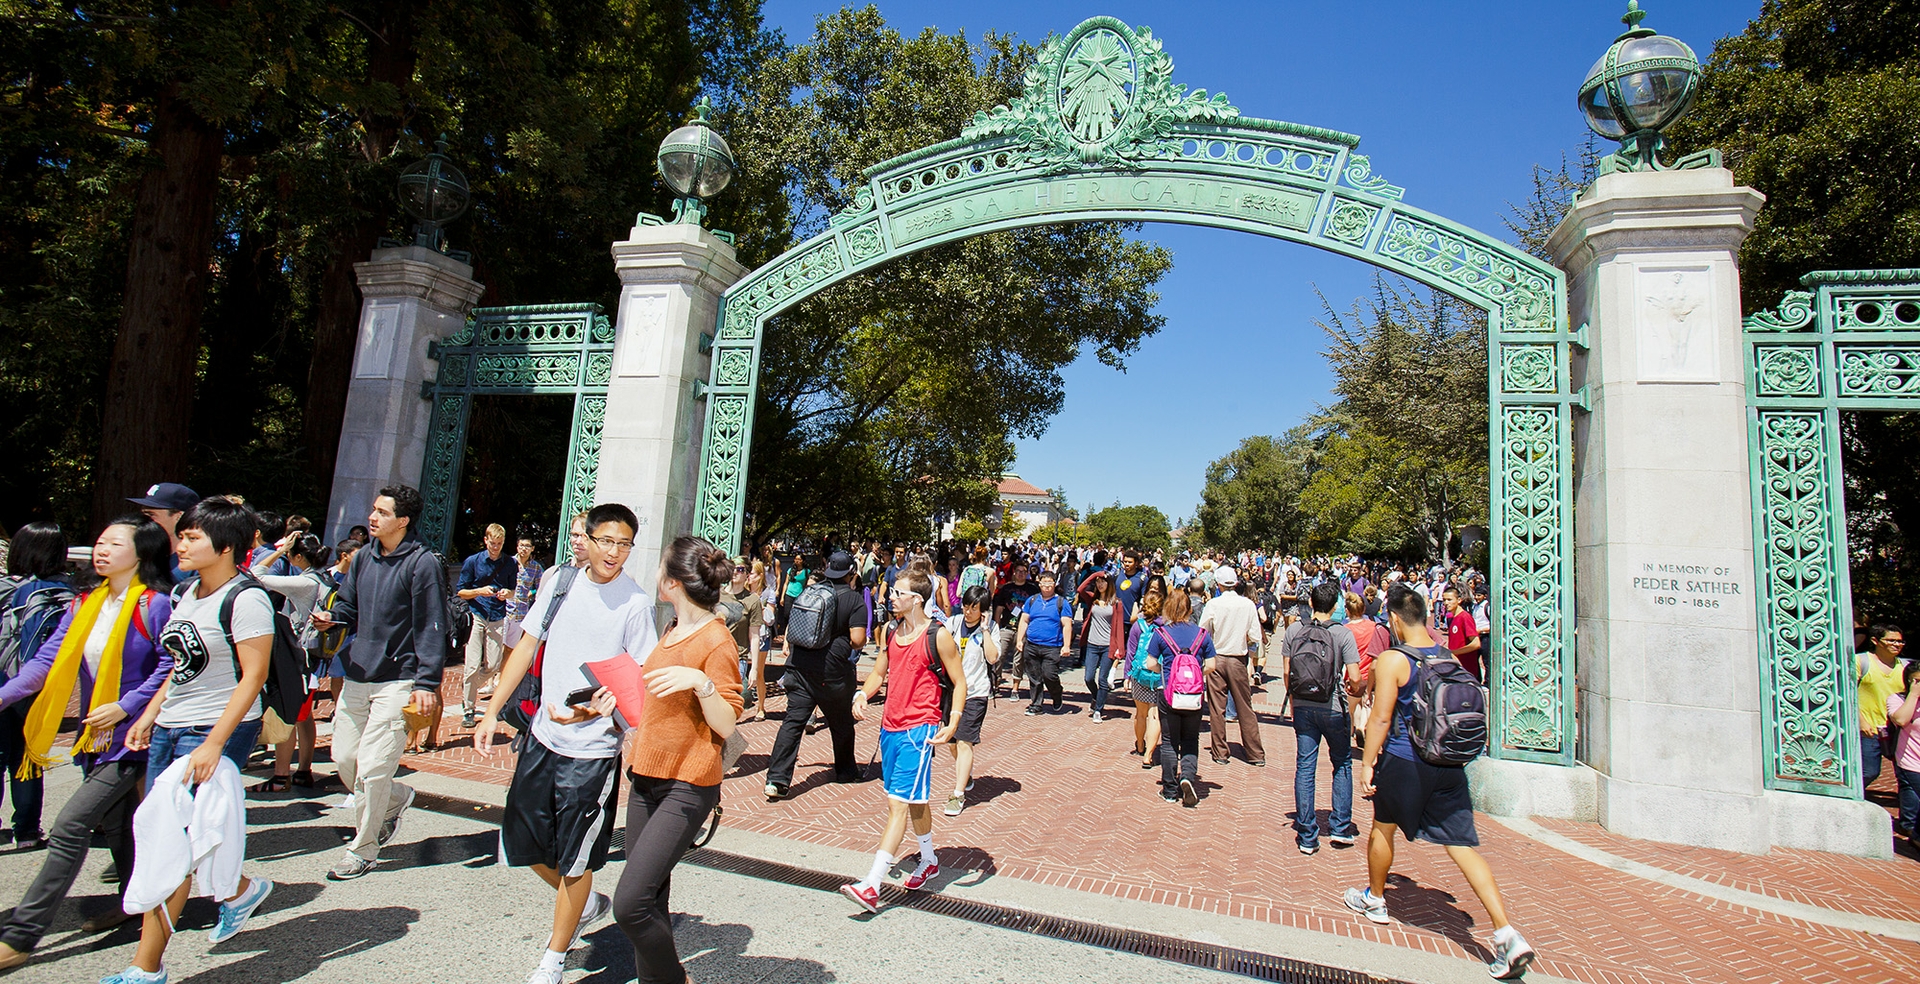 Crowds of students walk under Sather Gate on a warm day, some wearing shorts and sleeveless tops.